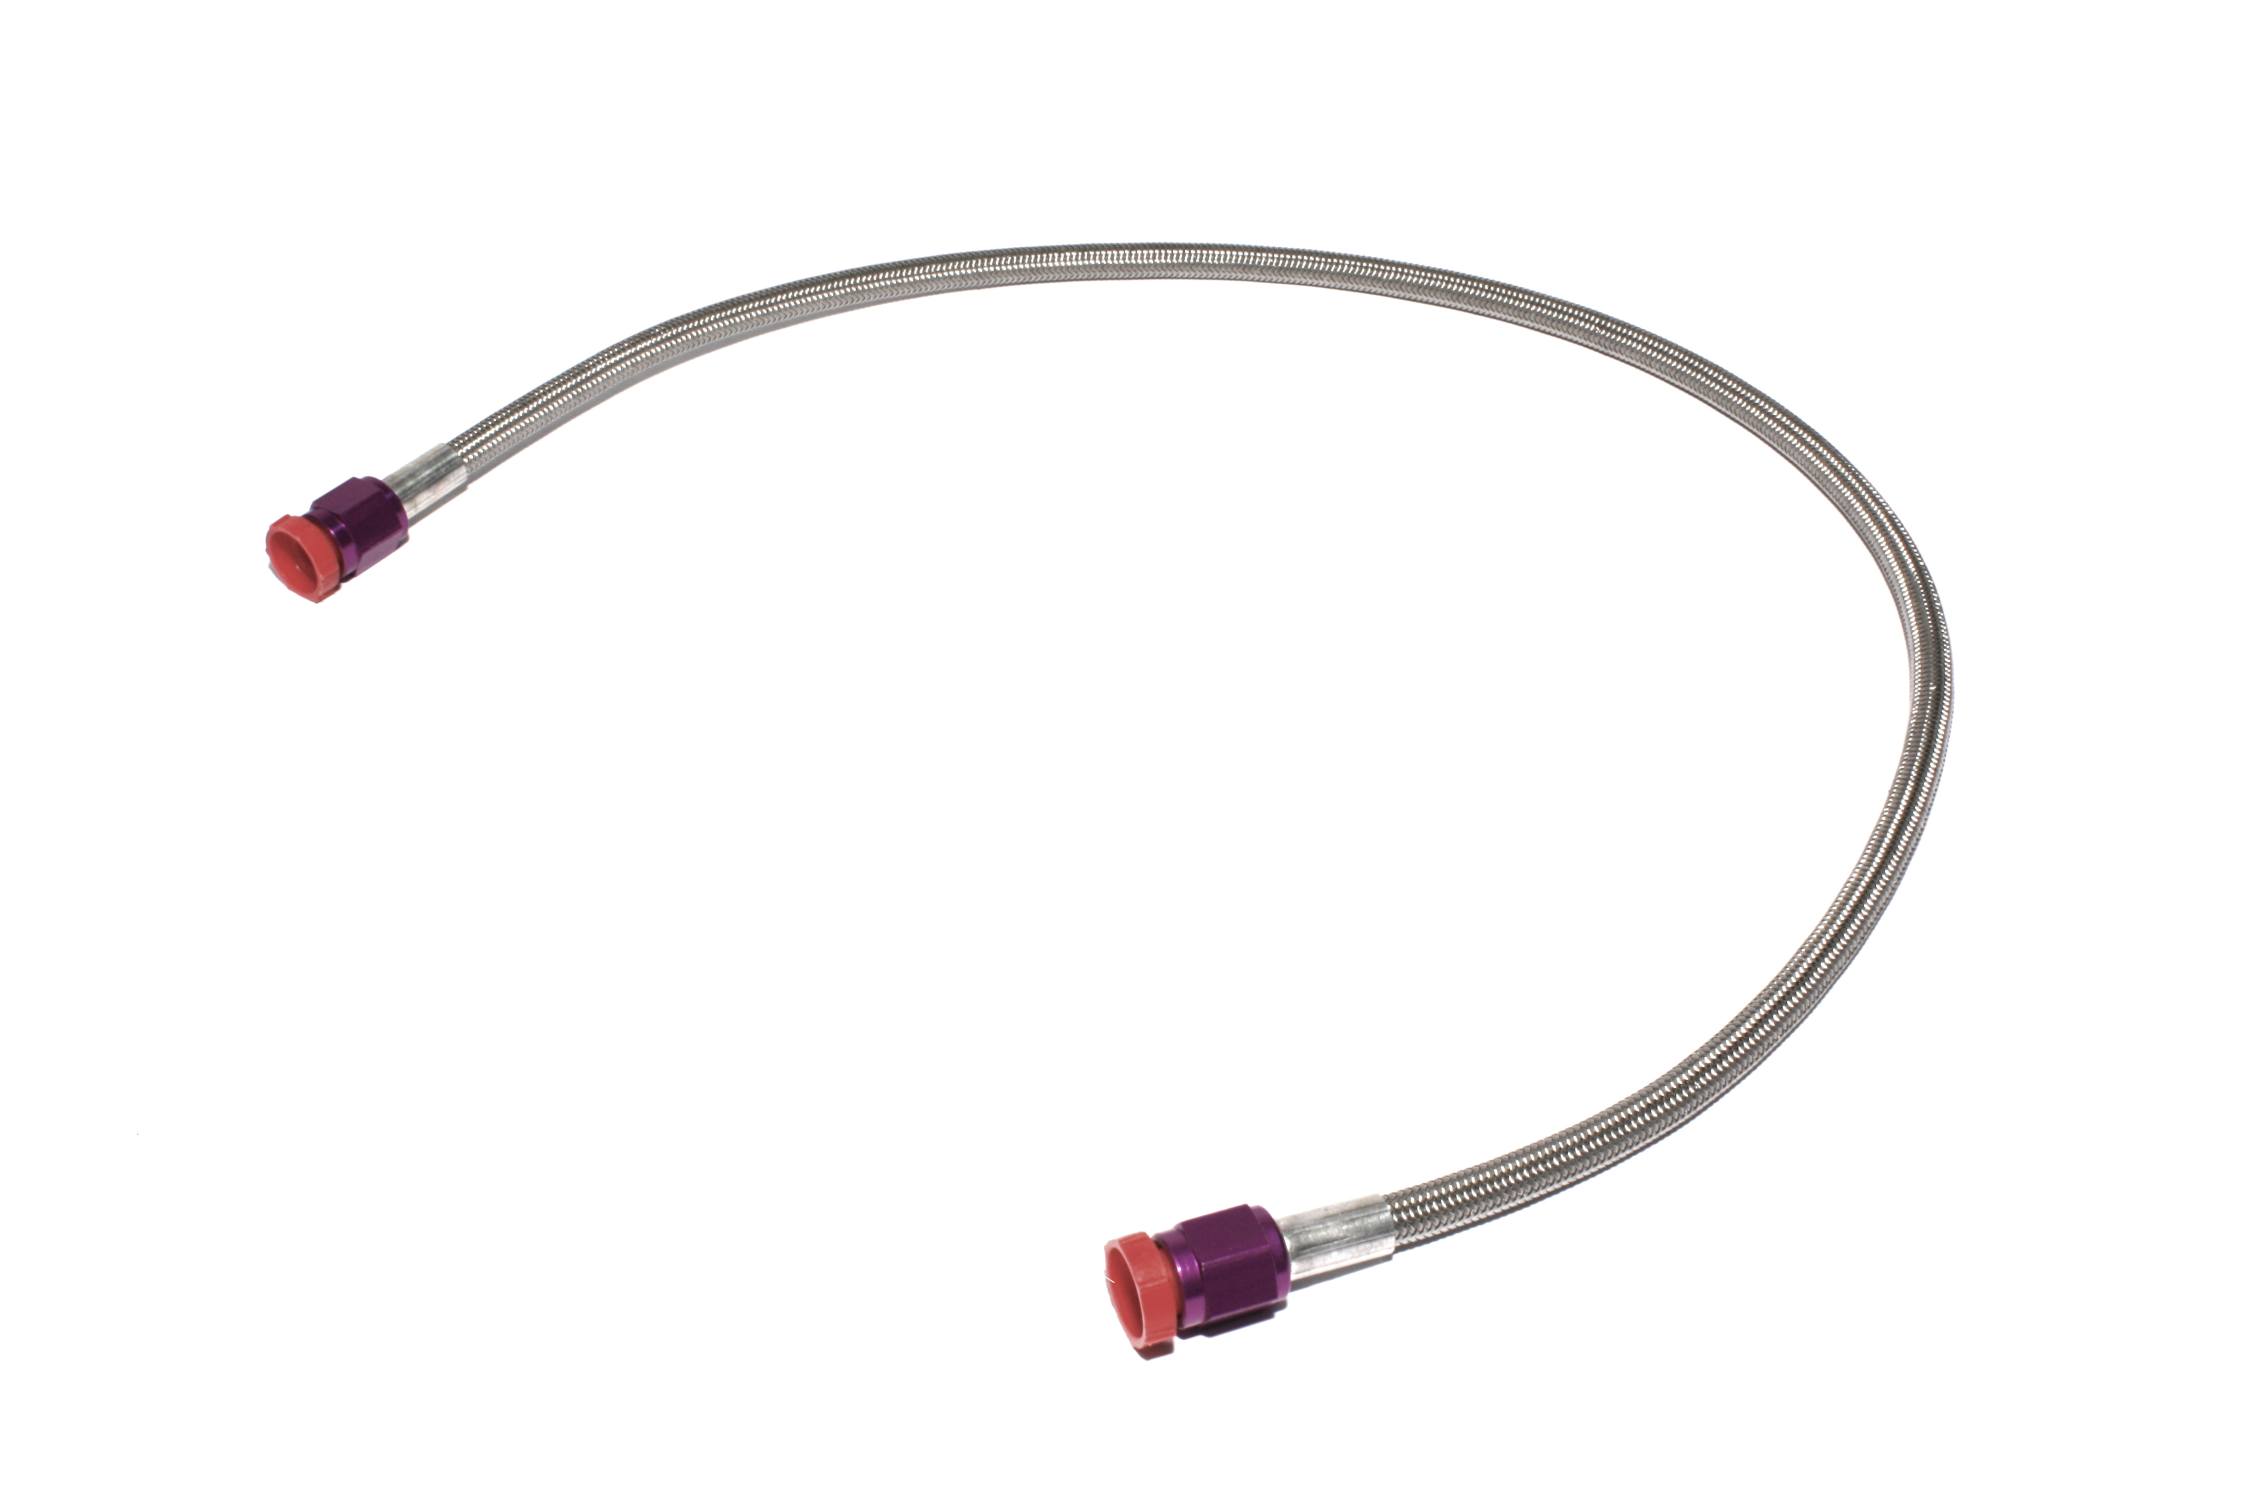 ZEX 3' (ft) Long -4AN Braided Hose with Purple Ends, 4AN 3', Corvette, Camaro and others